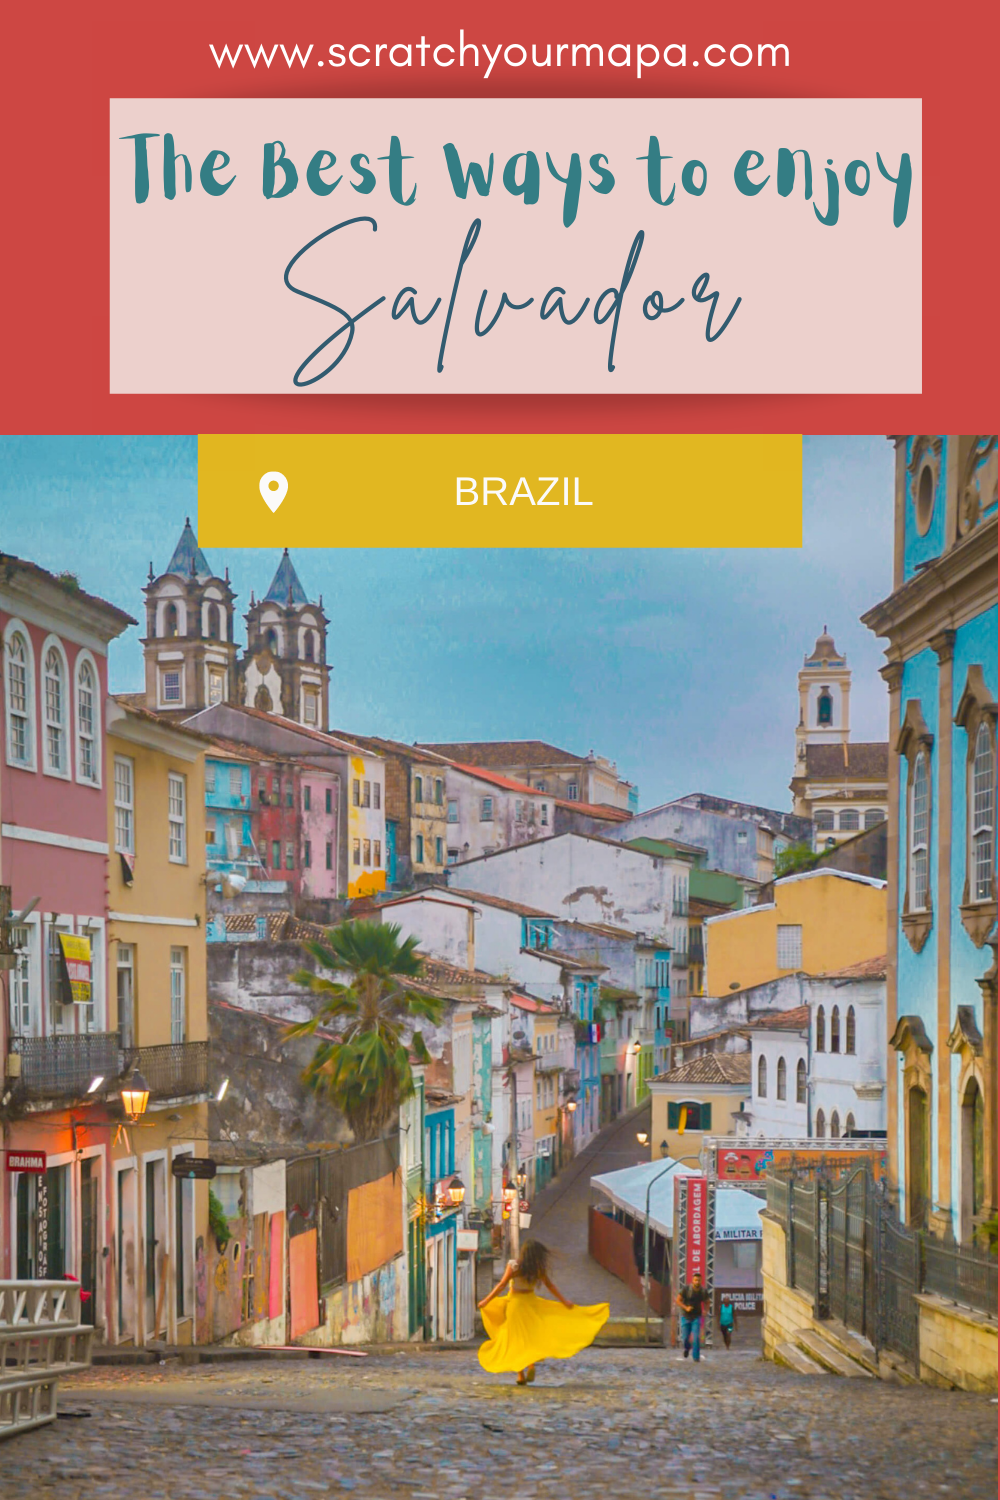 things to do in Salvador, Brazil pin